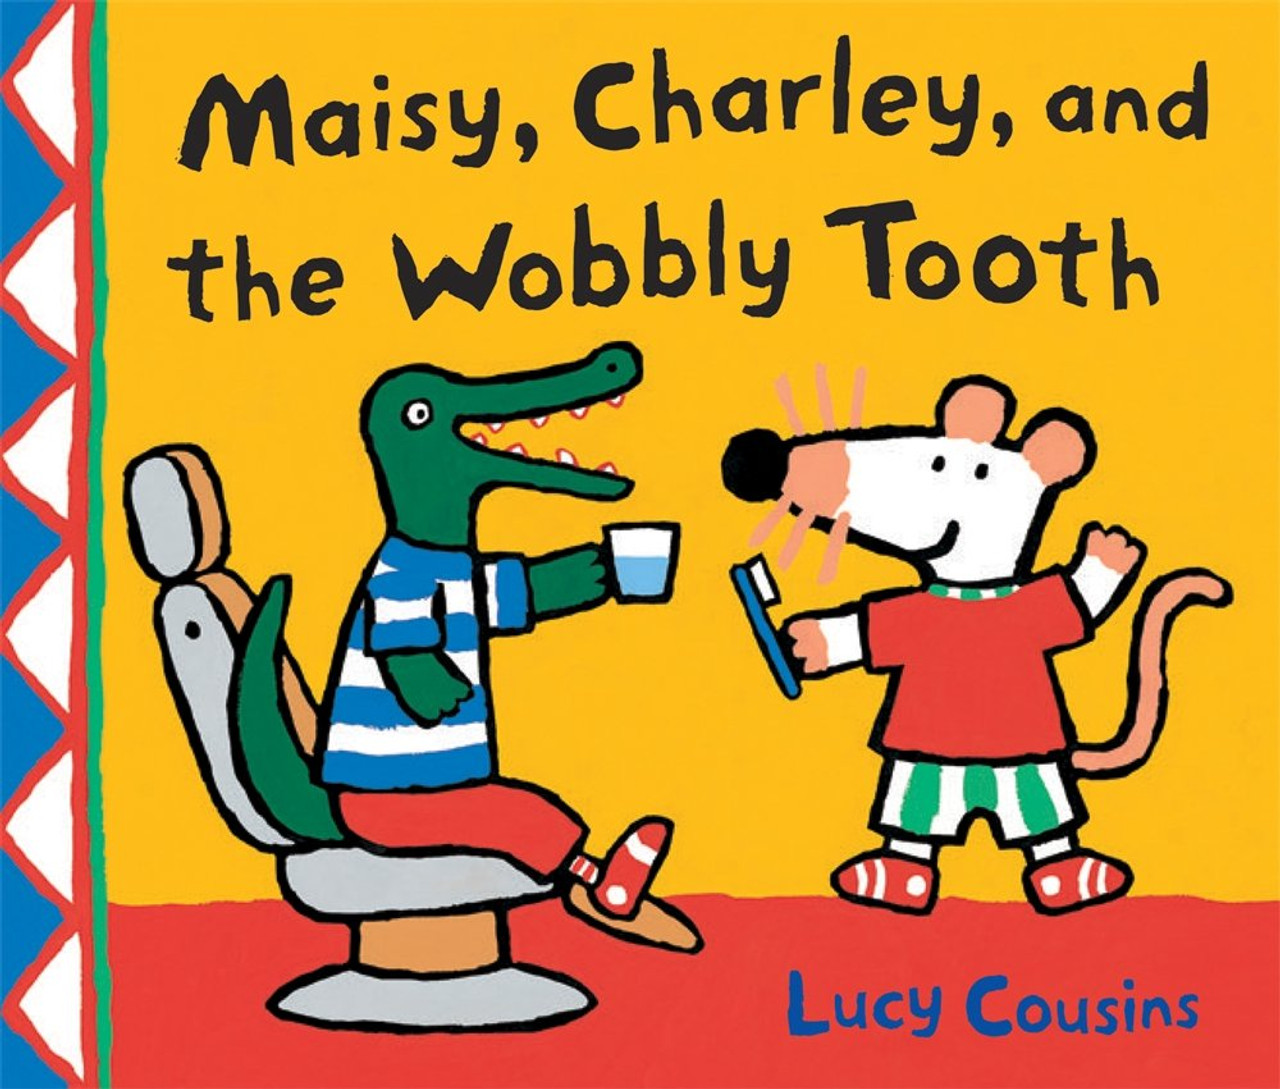 On his first trip to the dentist, Charley gets lots of moral support from Maisy and friends, in a full-length story that readers are sure to sink their teeth into.